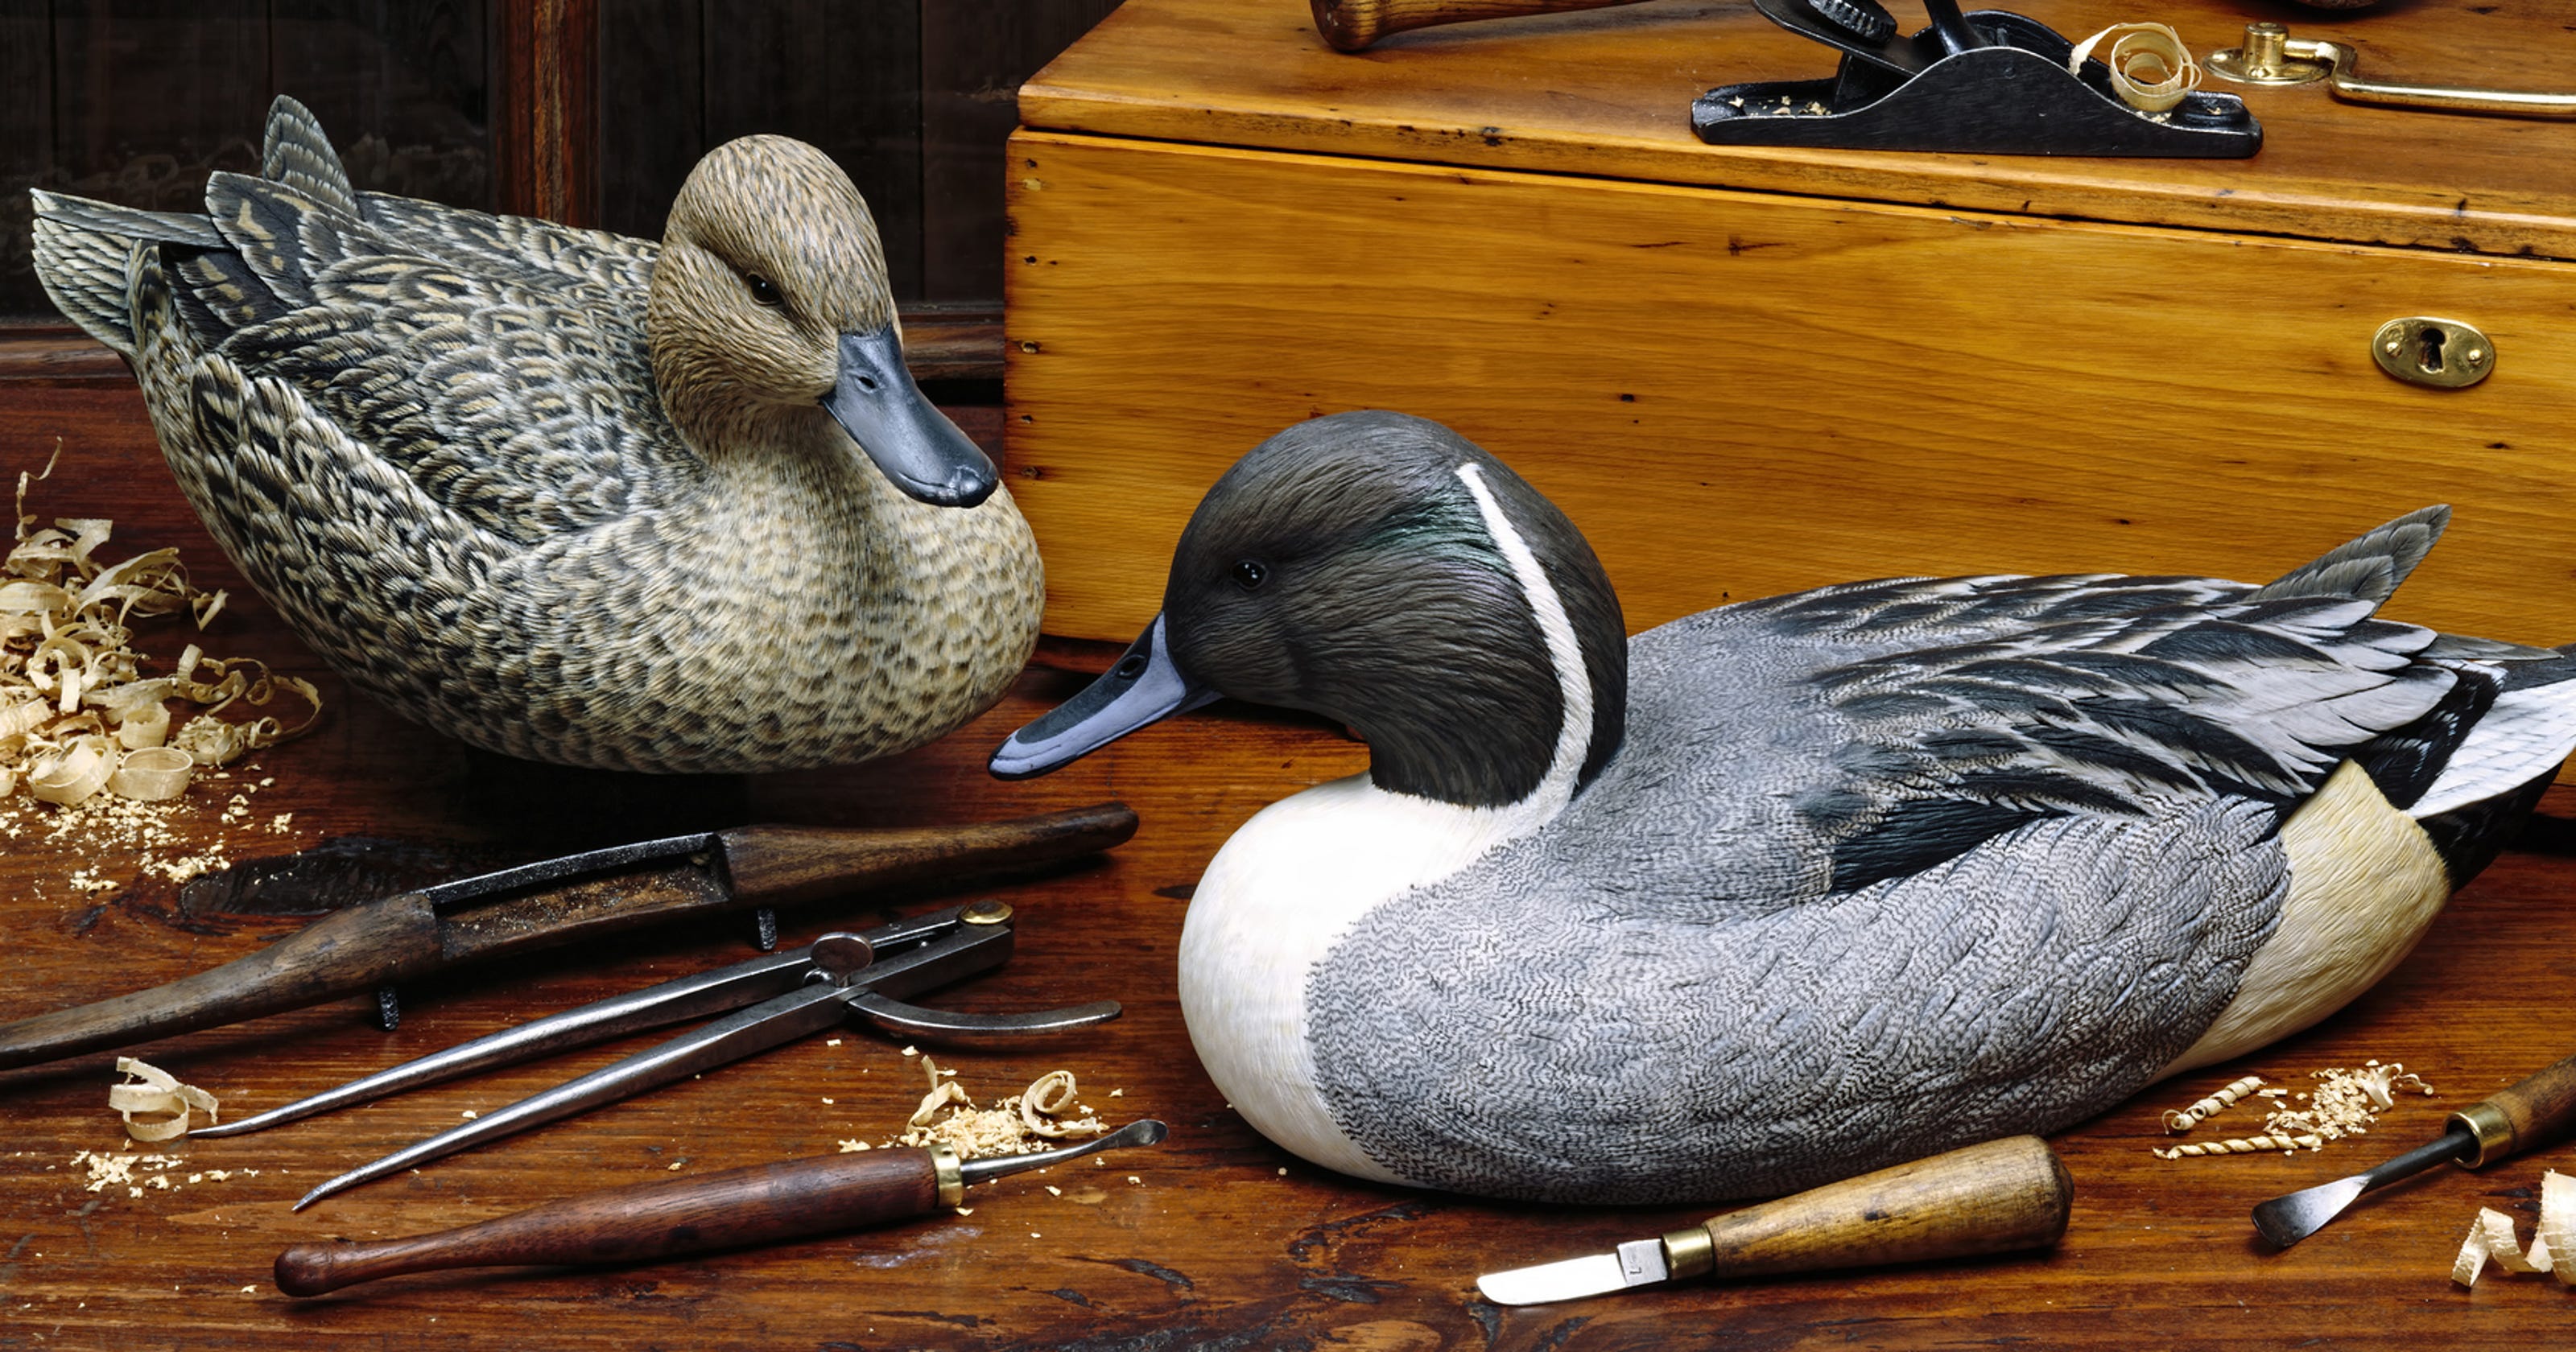 Museum’s duck decoy collection moves to Hammonton, for now